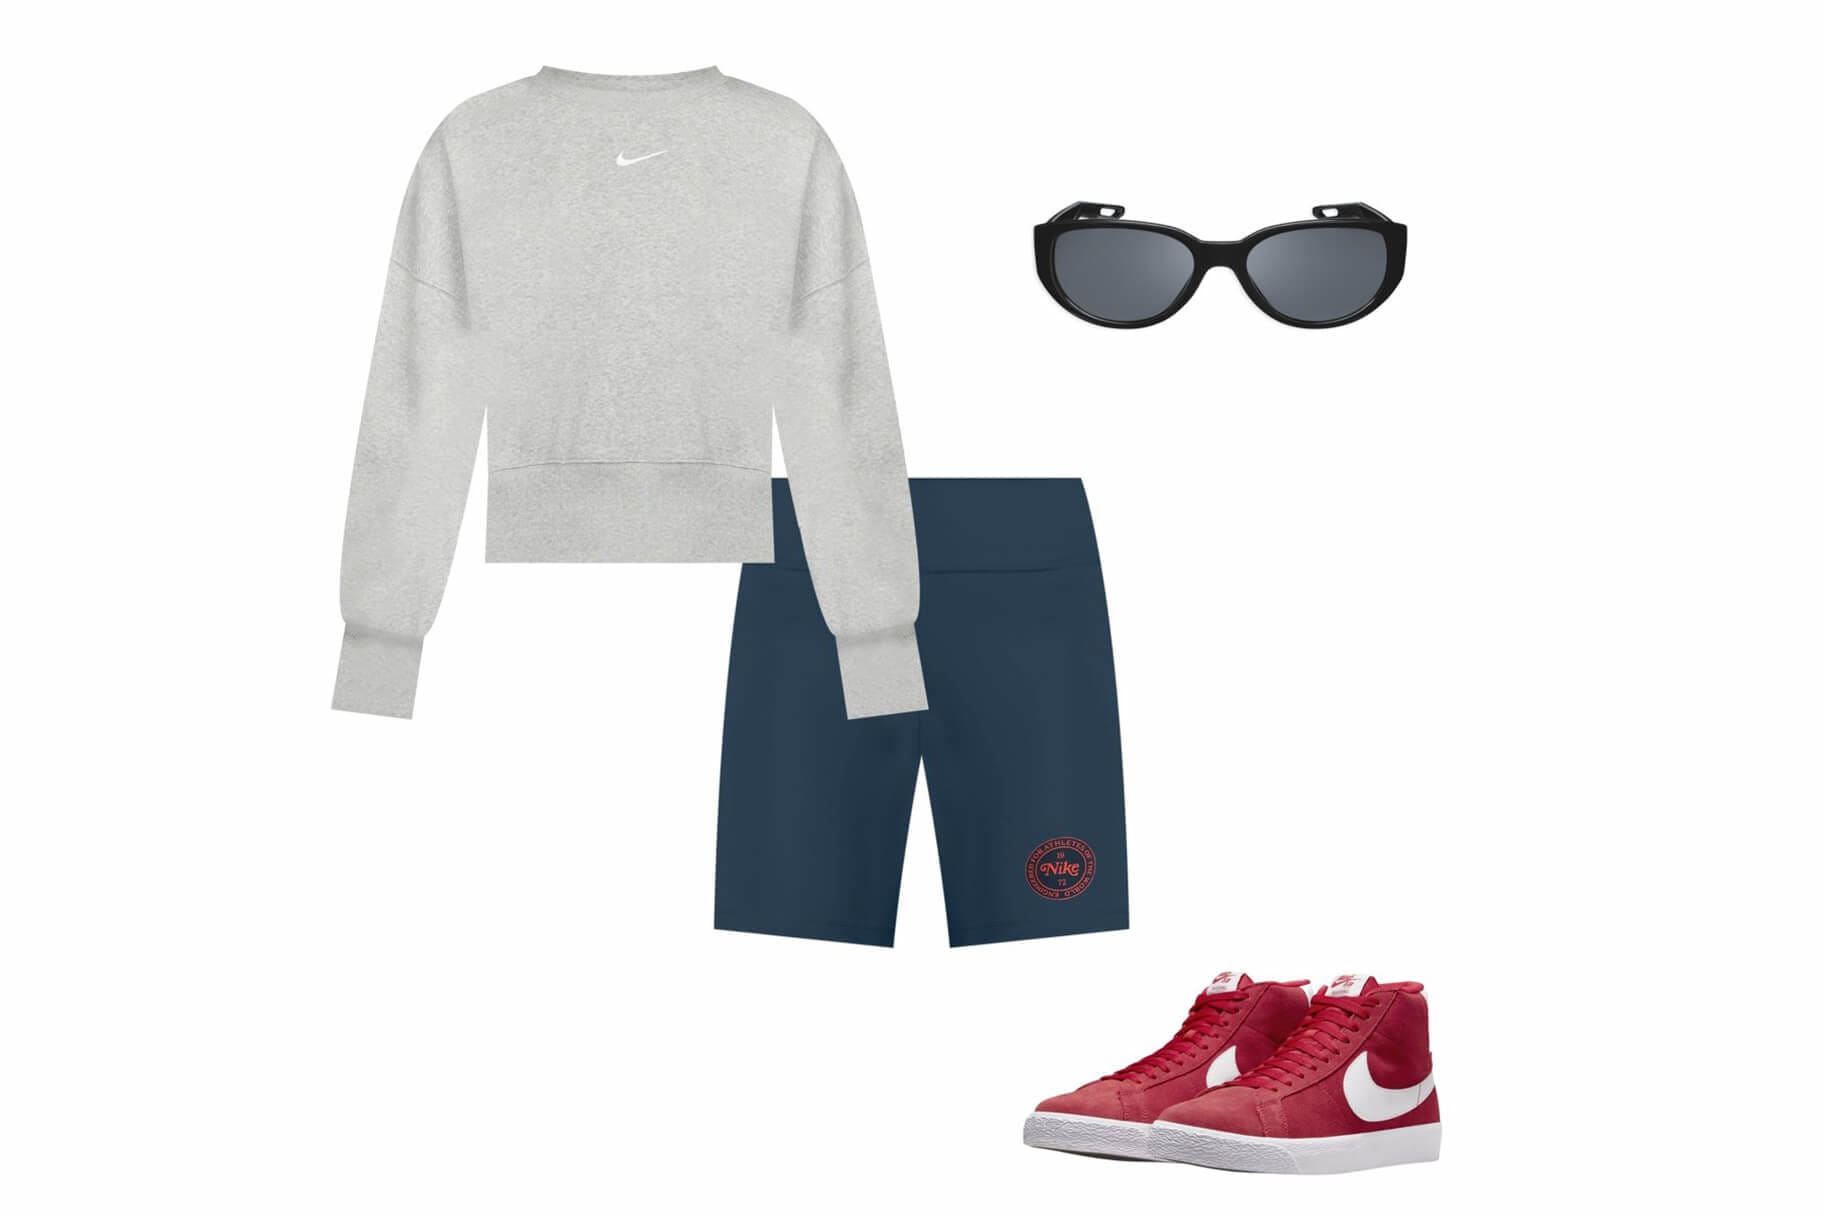 5 biker shorts outfit ideas to wear right now . Nike IN